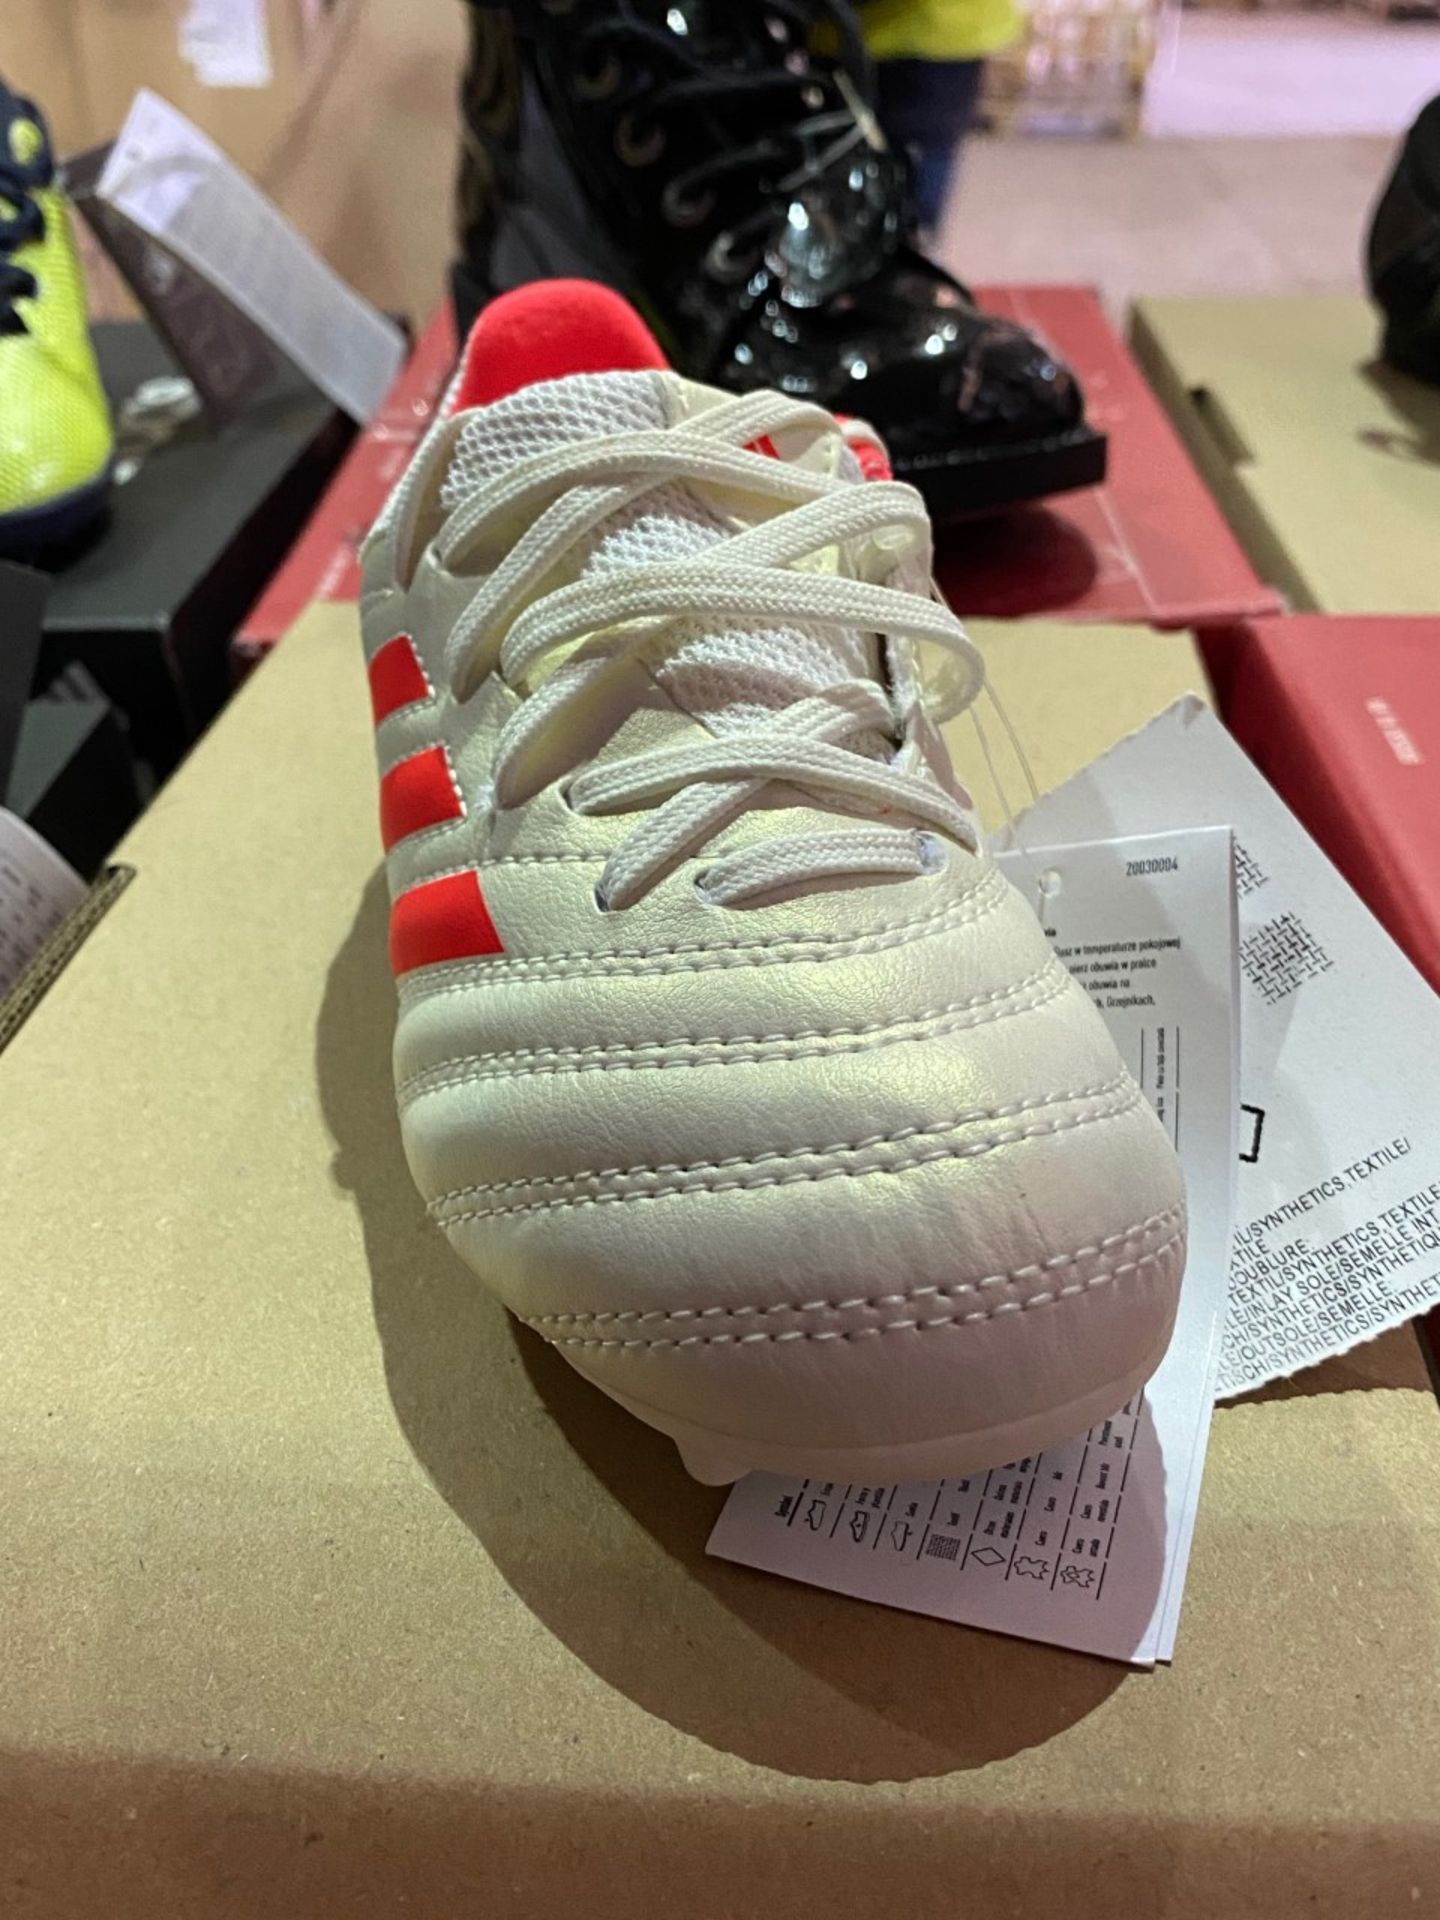 NEW & BOXED ADIDAS OFF WHITE FOOTBAL BOOT SIZE INFANT 10 - Image 2 of 2